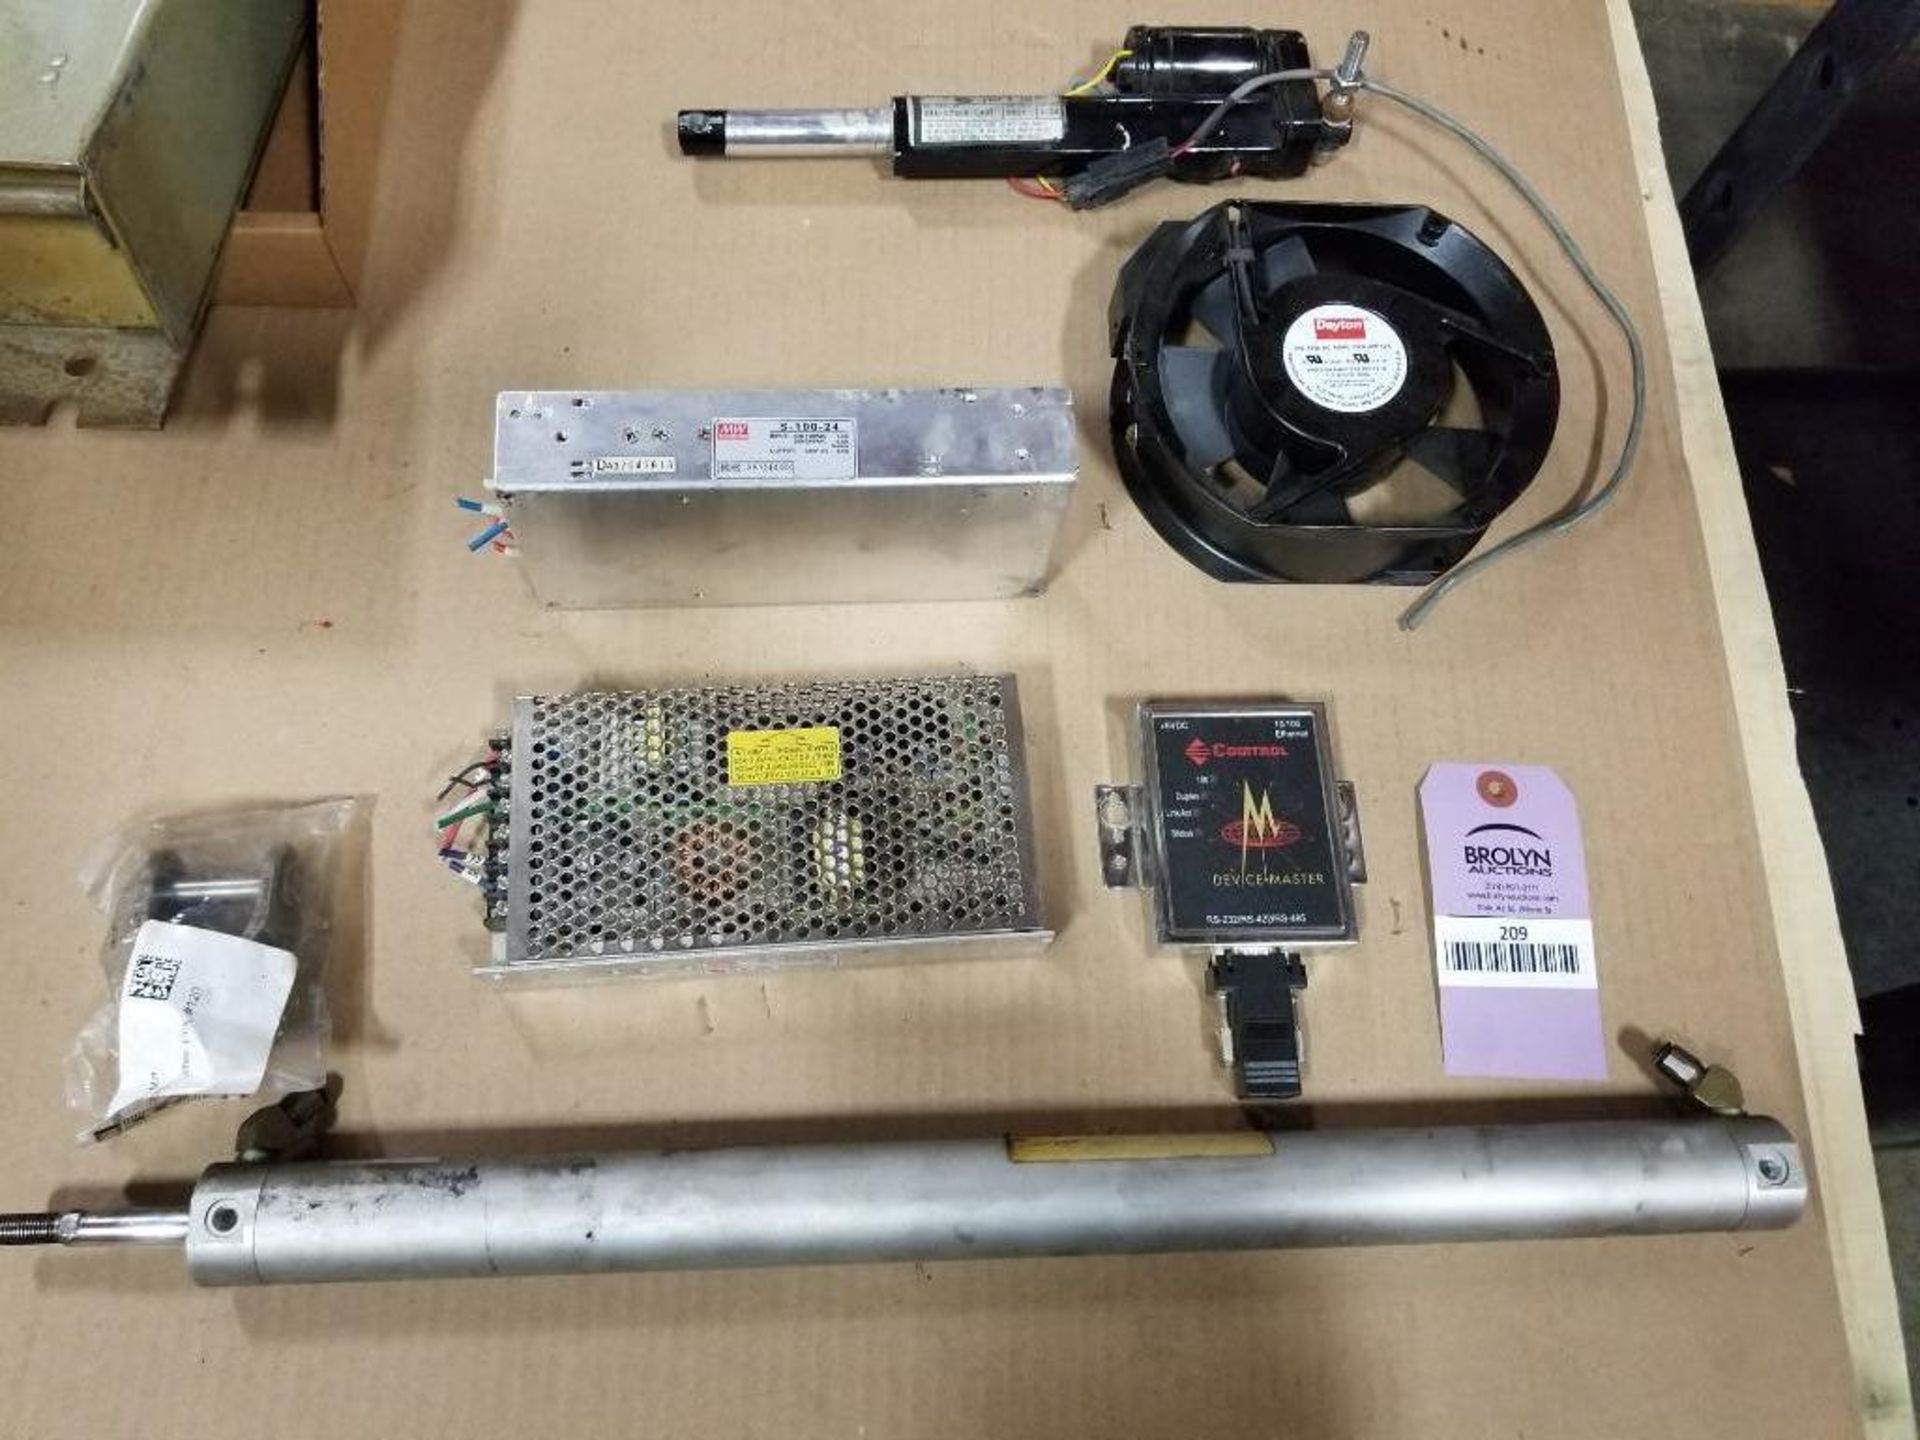 Assorted replacement parts. Actuator, fan, power supply. Dayton, Meanwell.